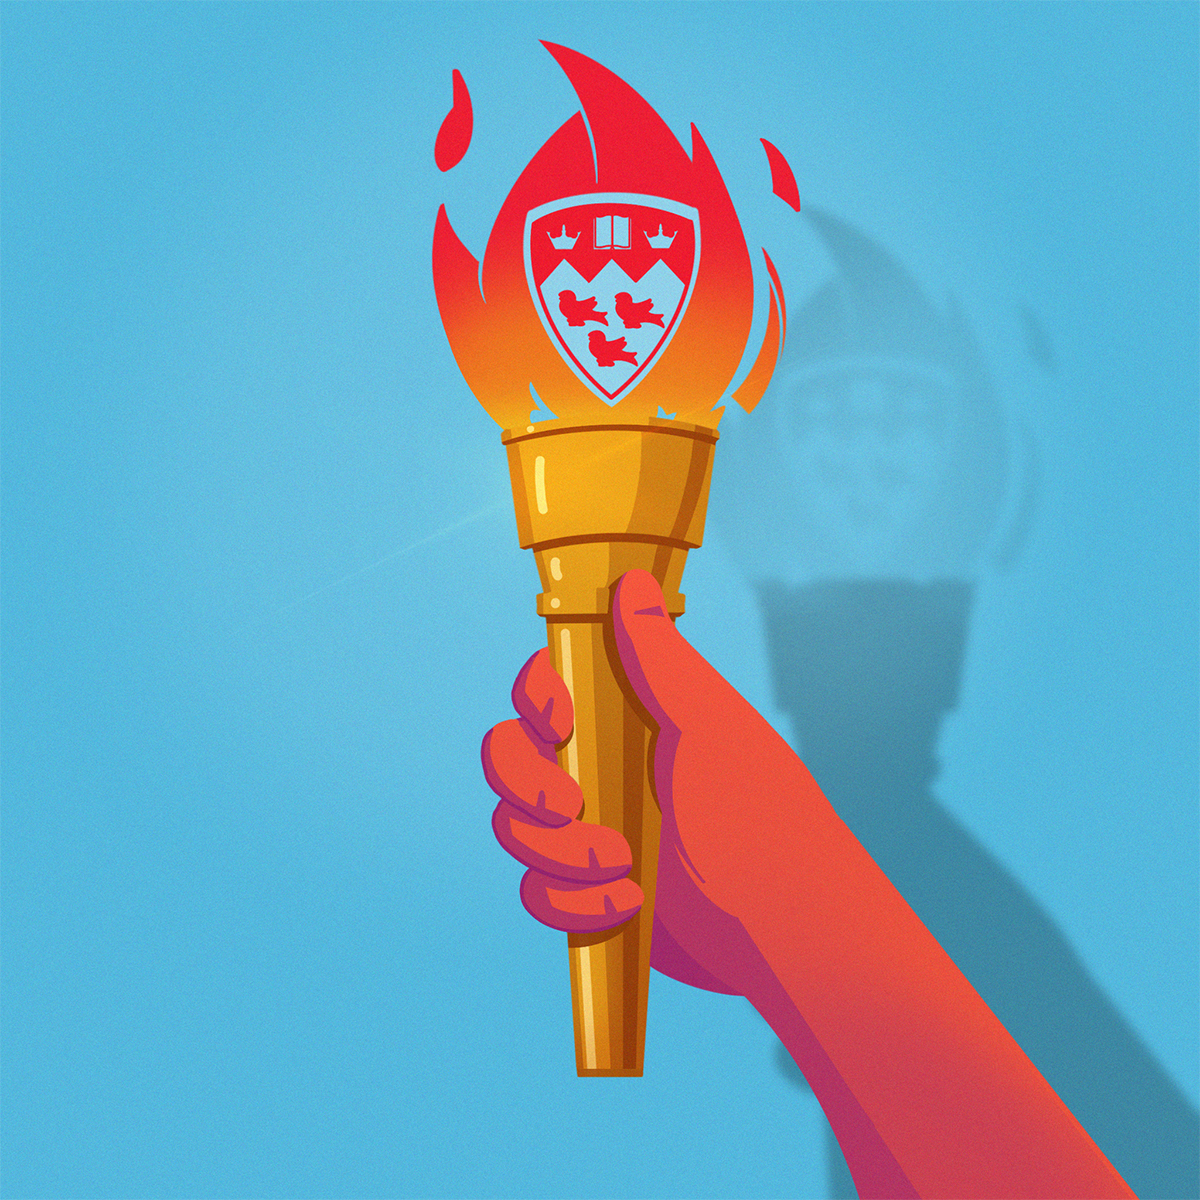 Illustration of a hand holding an olympic flame